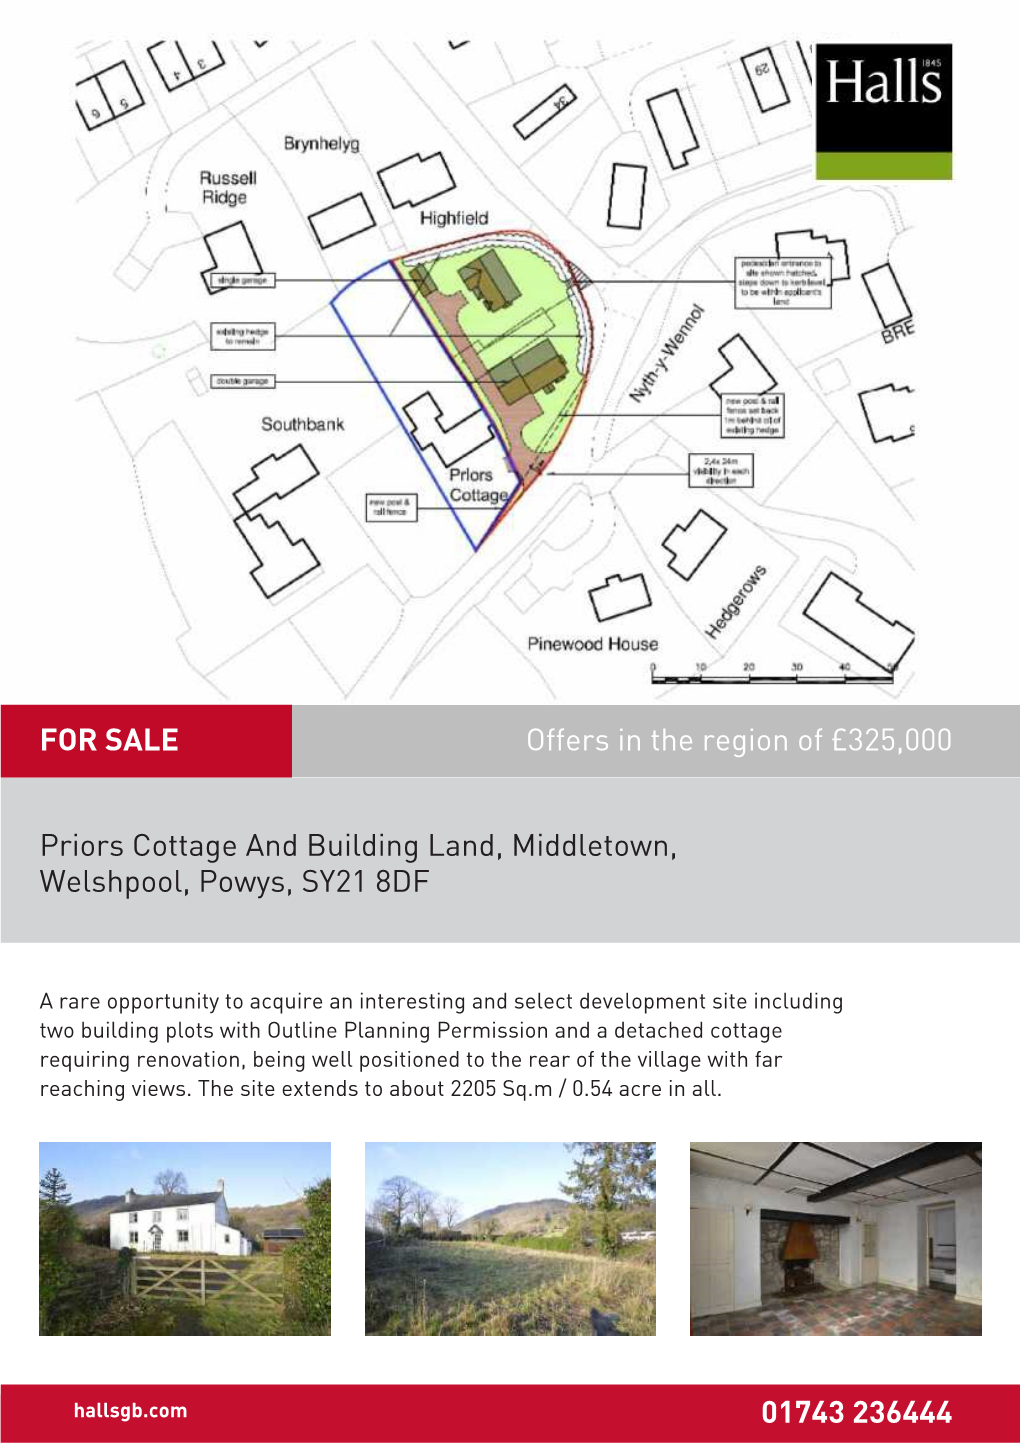 Priors Cottage and Building Land, Middletown, Welshpool, Powys, SY21 8DF